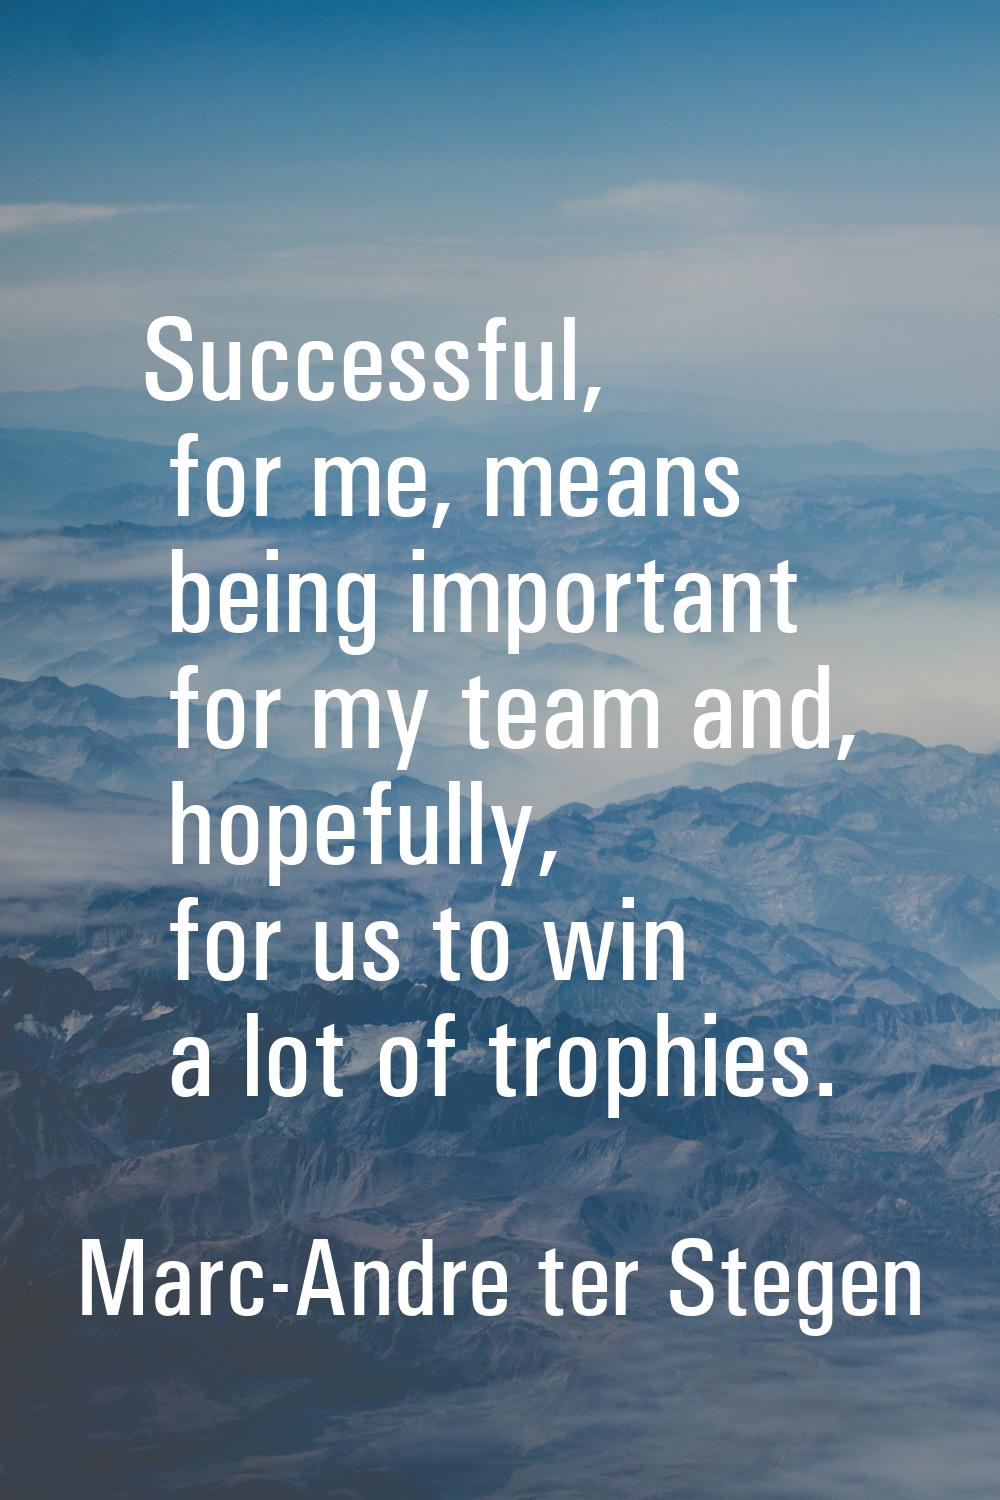 Successful, for me, means being important for my team and, hopefully, for us to win a lot of trophi